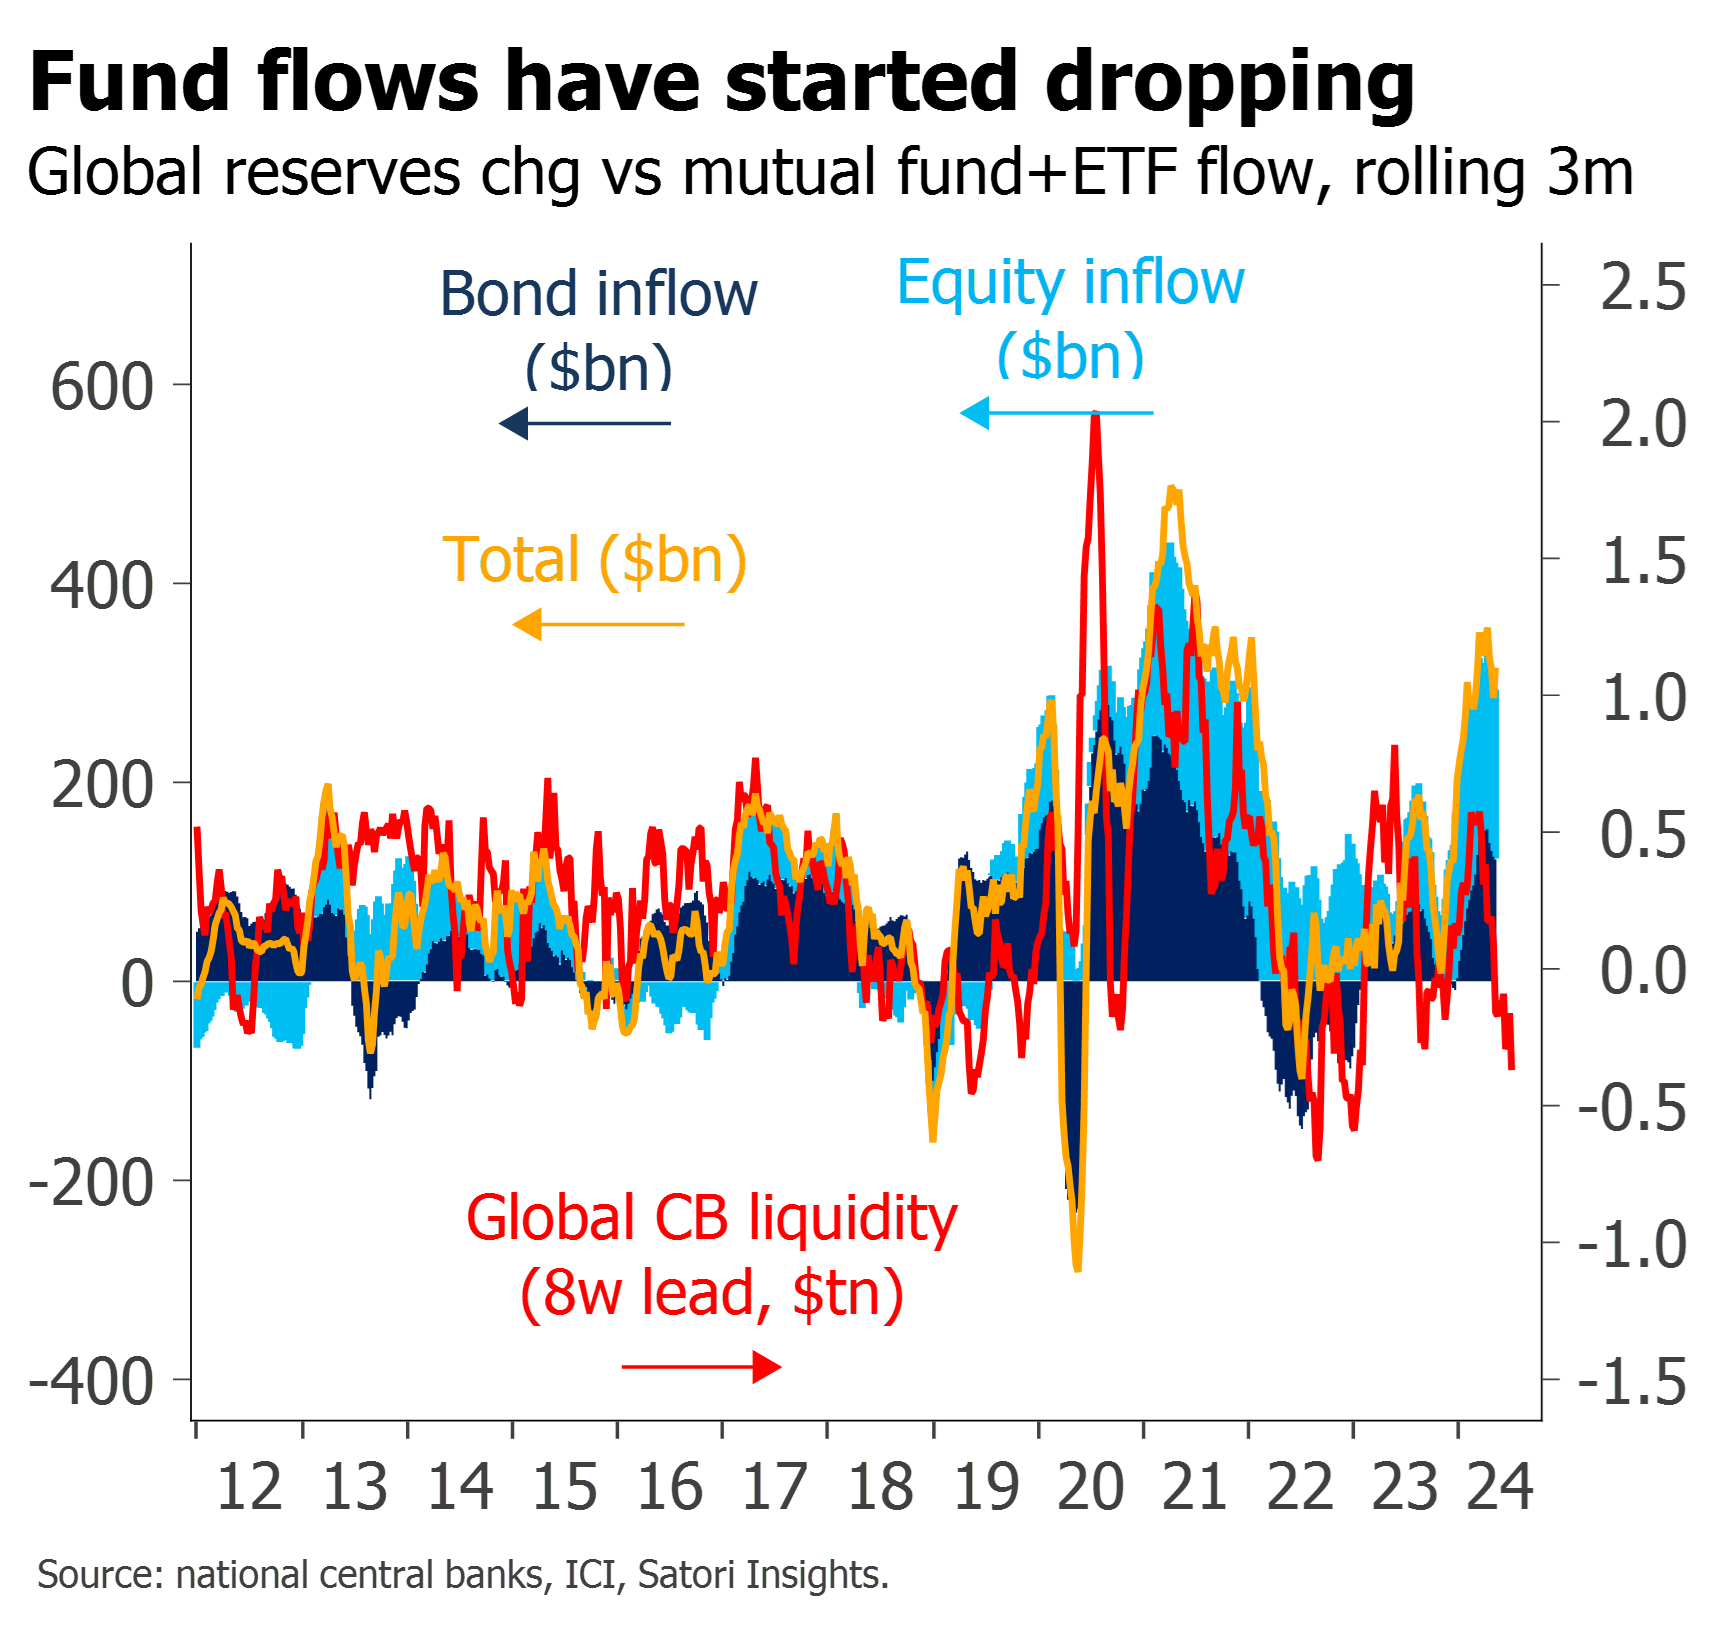 cb liquidity down, trailing fund flows still elevated but dropping